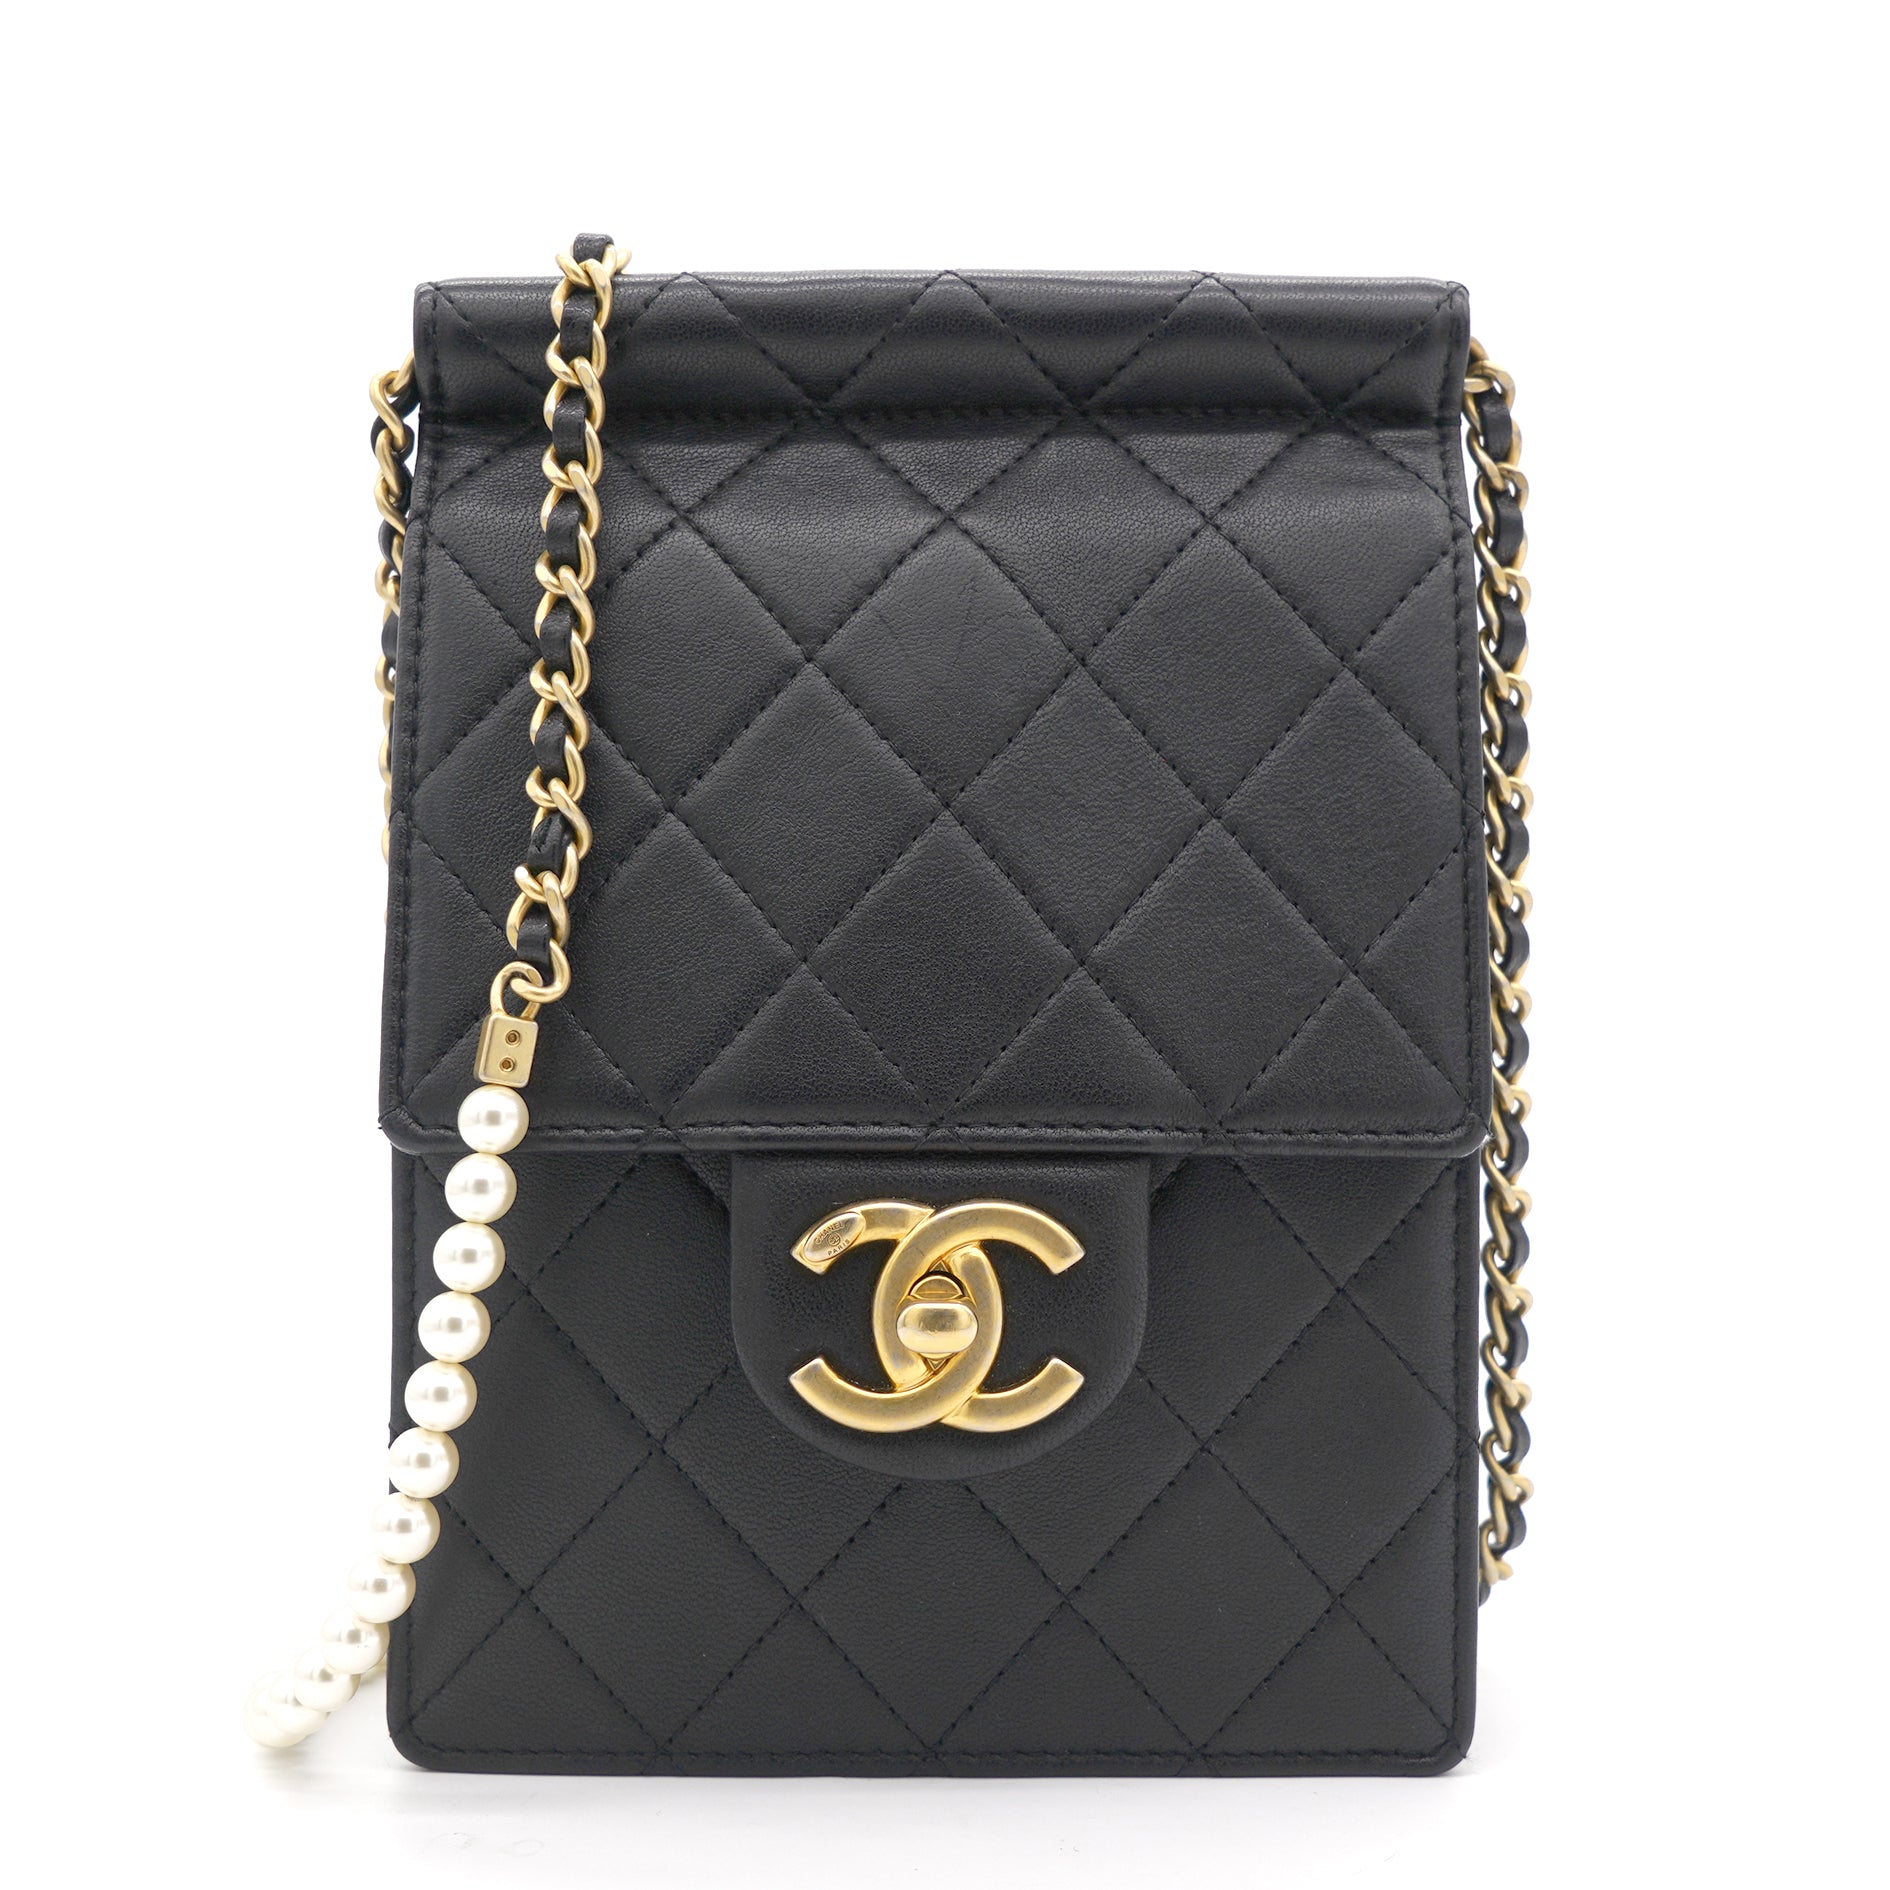 CHANEL Lambskin Quilted Small Chic Pearls Flap White 384677  Bags  Shoulder bag Chanel crossbody